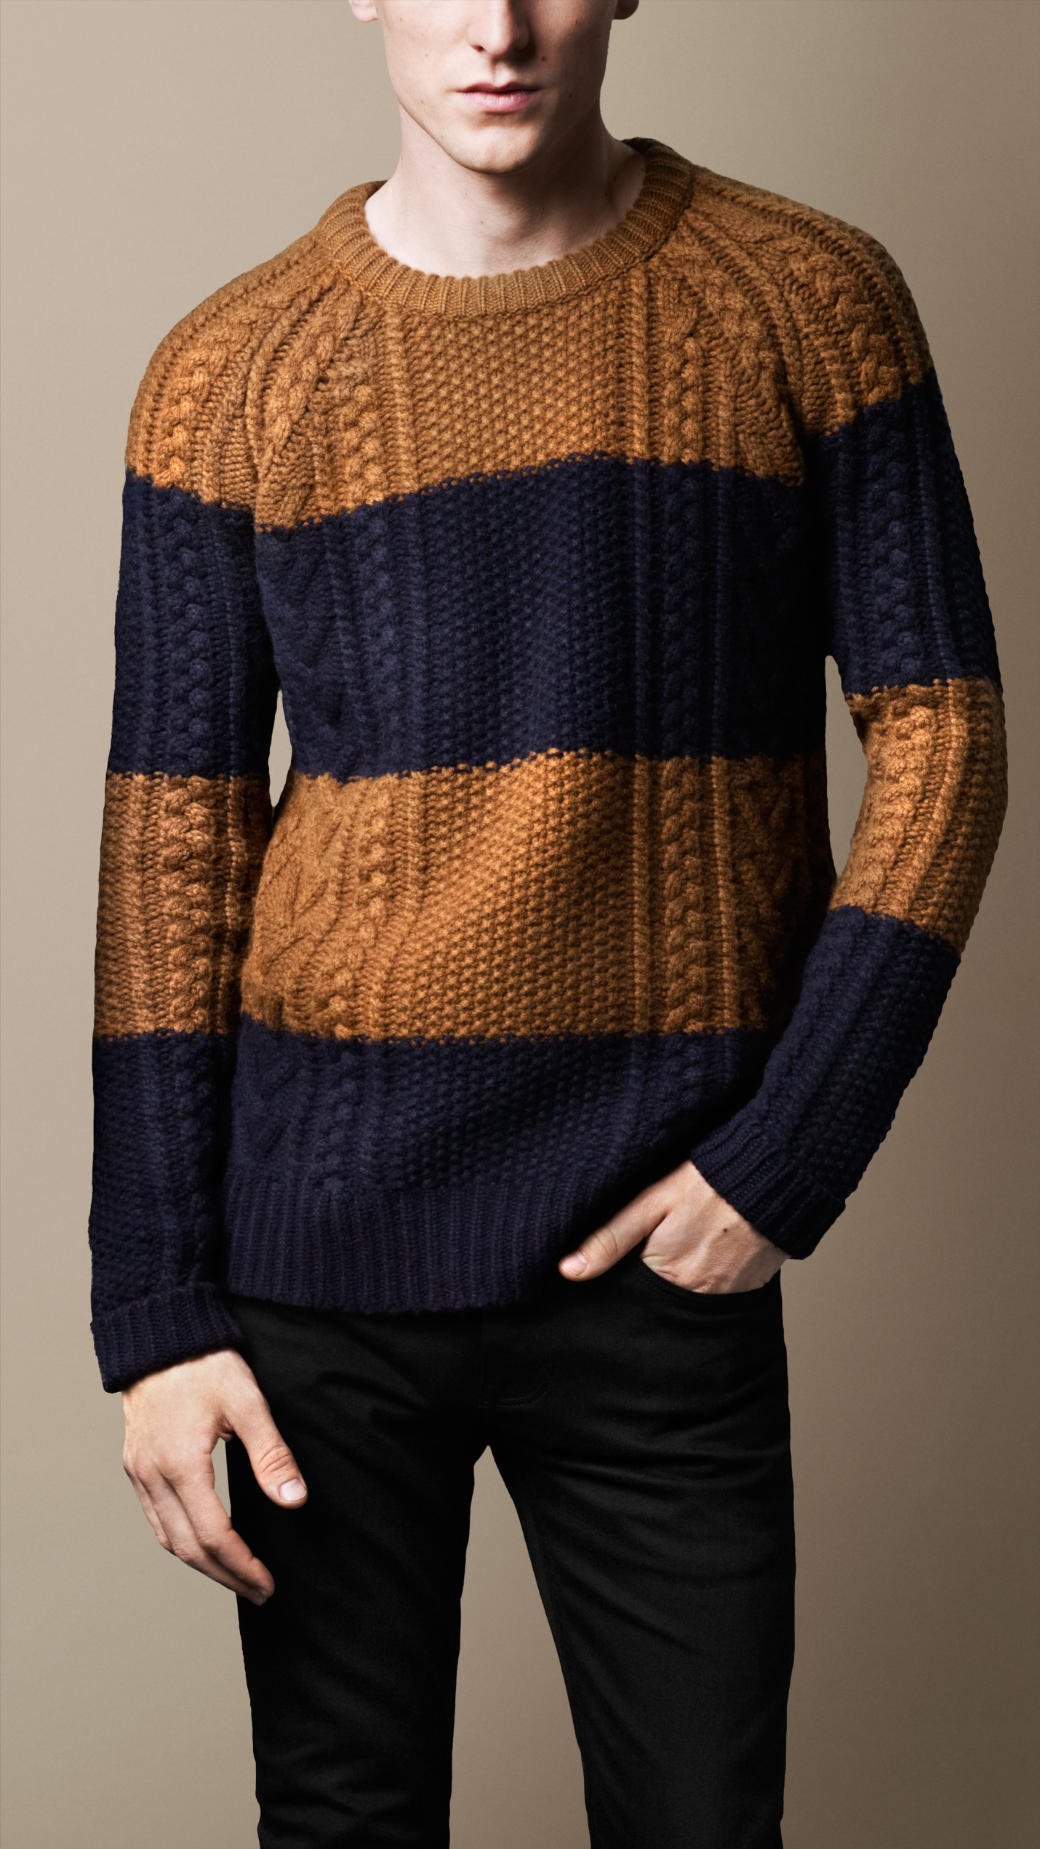 Burberry Block Stripe Cable Knit Sweater in Brown for Men - Lyst